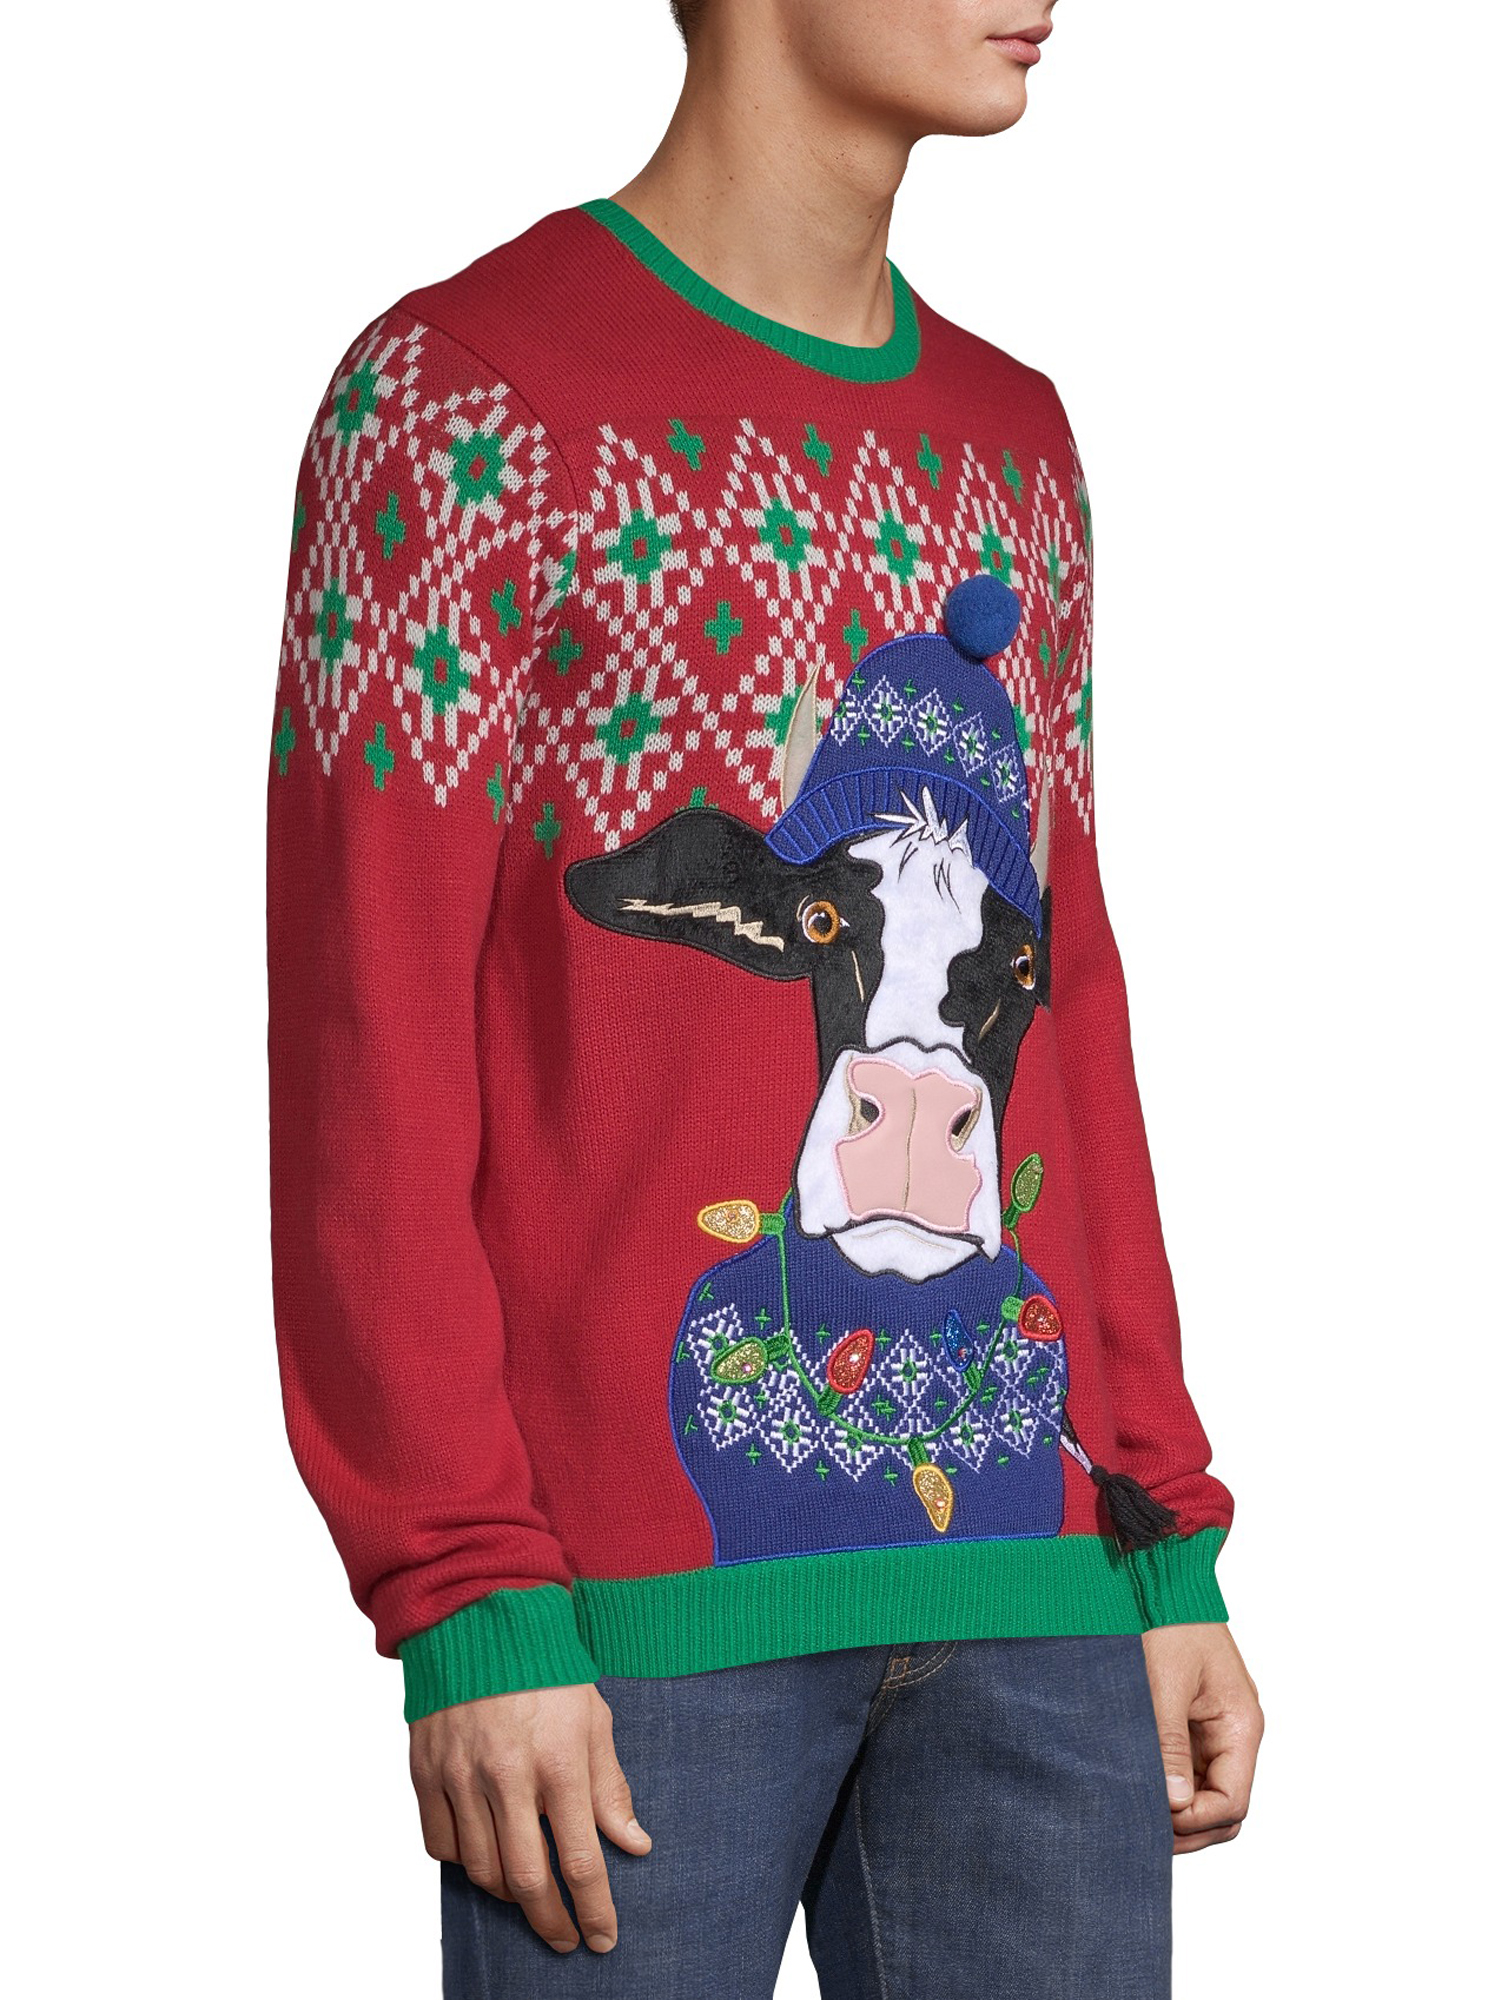 Holiday Time Men's Light-Up Cow Ugly Christmas Sweater - image 3 of 6